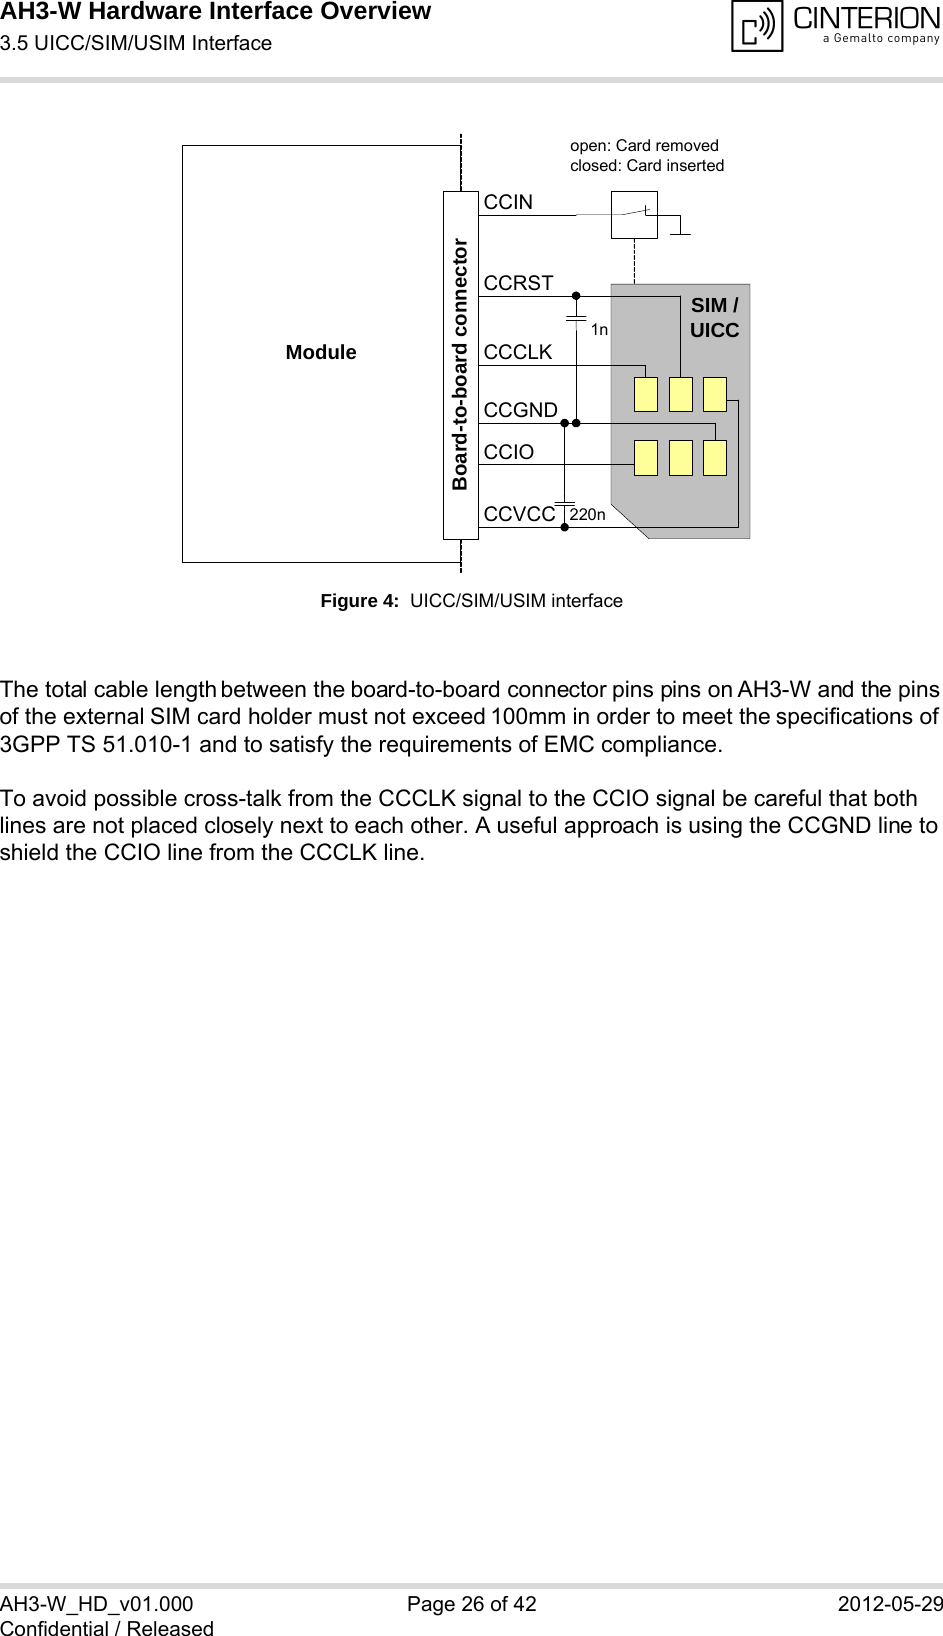 AH3-W Hardware Interface Overview3.5 UICC/SIM/USIM Interface28AH3-W_HD_v01.000 Page 26 of 42 2012-05-29Confidential / ReleasedFigure 4:  UICC/SIM/USIM interfaceThe total cable length between the board-to-board connector pins pins on AH3-W and the pins of the external SIM card holder must not exceed 100mm in order to meet the specifications of 3GPP TS 51.010-1 and to satisfy the requirements of EMC compliance.To avoid possible cross-talk from the CCCLK signal to the CCIO signal be careful that both lines are not placed closely next to each other. A useful approach is using the CCGND line to shield the CCIO line from the CCCLK line.Moduleopen: Card removedclosed: Card insertedCCRSTCCVCCCCIOCCCLKCCINSIM /UICC1n220nBoard-to-board connectorCCGND